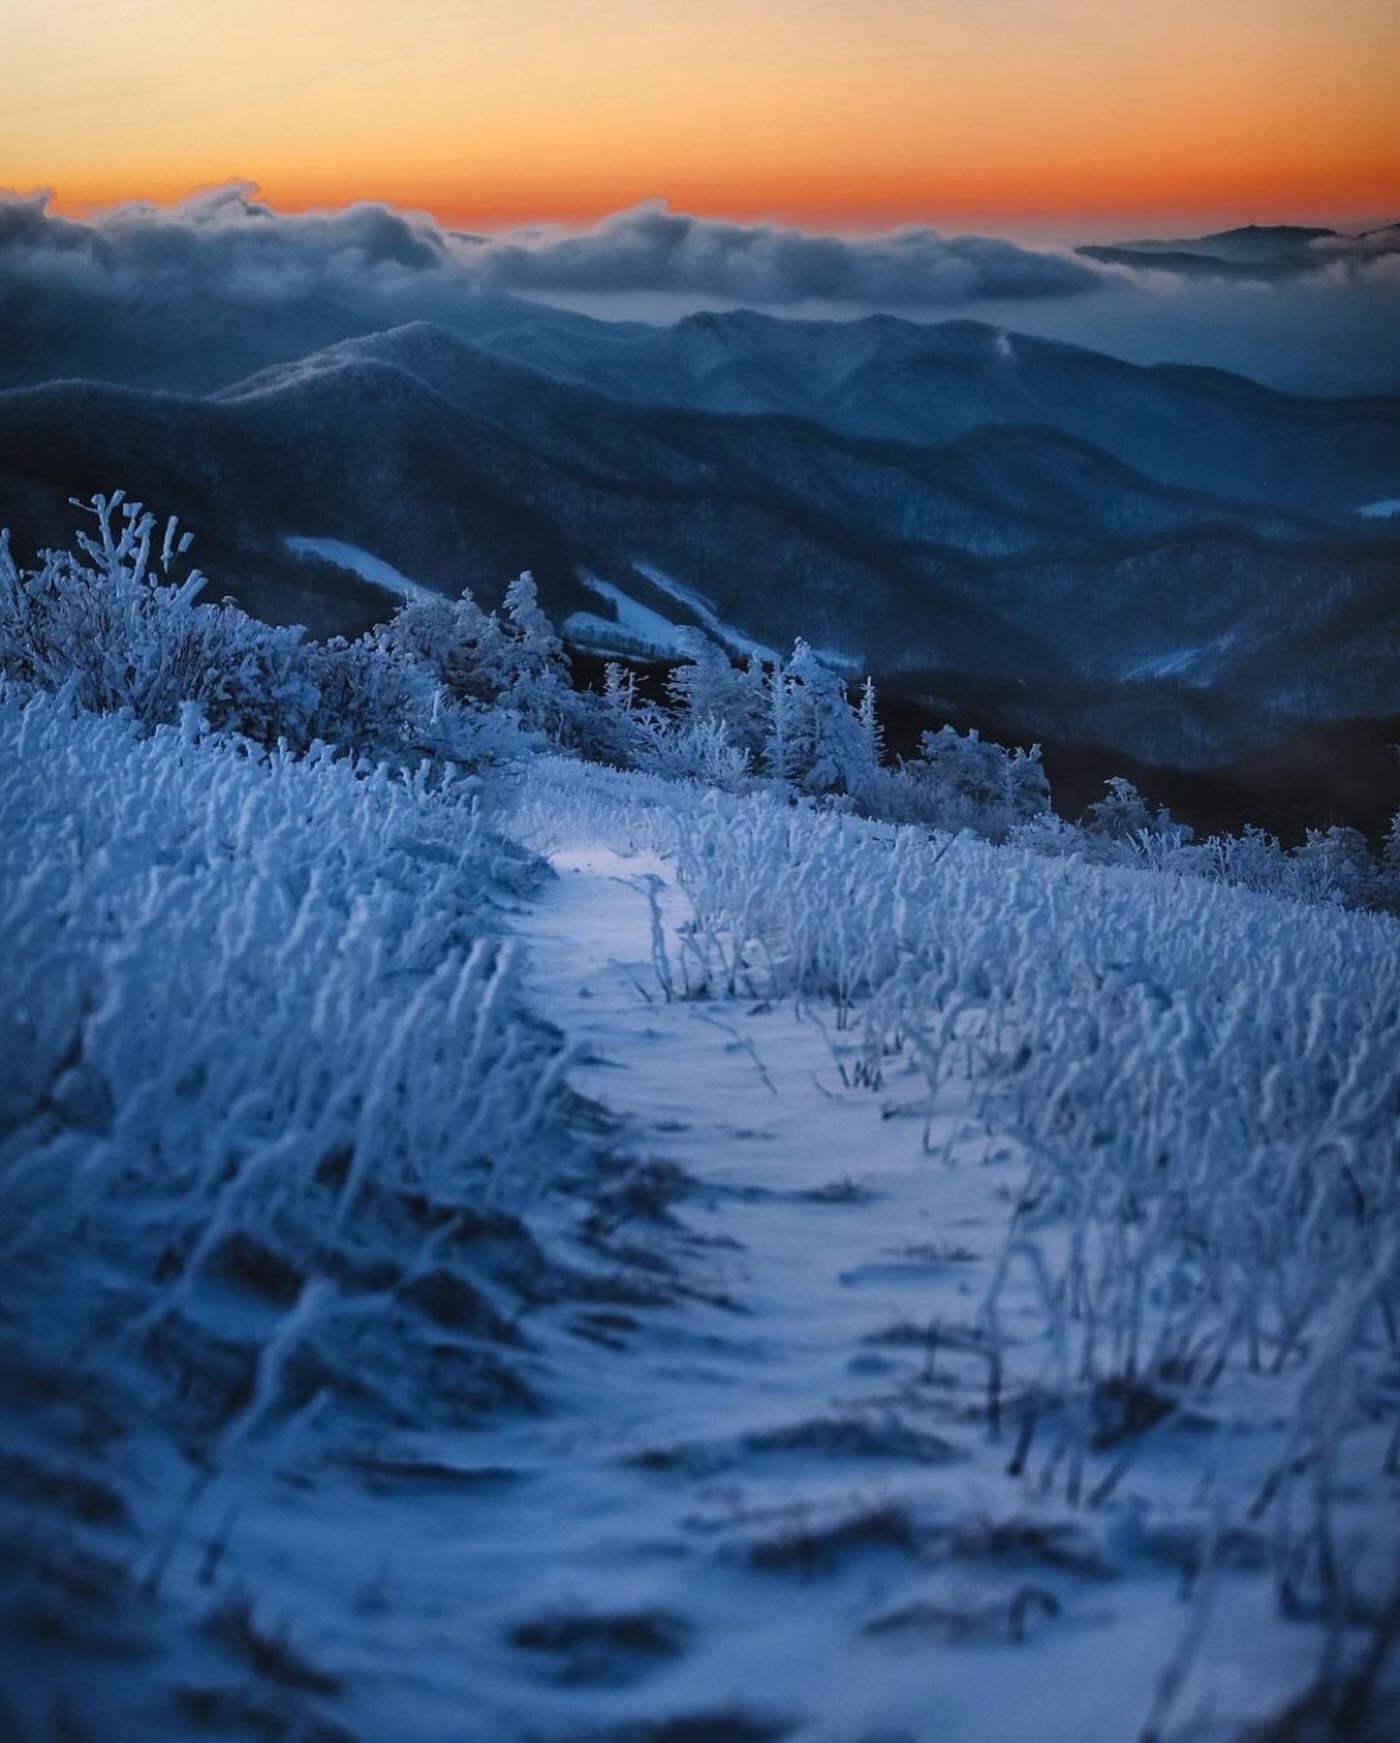 Early bird gets the 🐛 just don&rsquo;t forget your coat! 

Anotha one by @andrewtburns 

#hellofrom #visitnc #ncoutdoors #blueridgemoments #eastcoastcreatives #828isgreat #artofvisuals #amongthewild #awakethesoul #folkscenery #earthoutdoors #outdoor